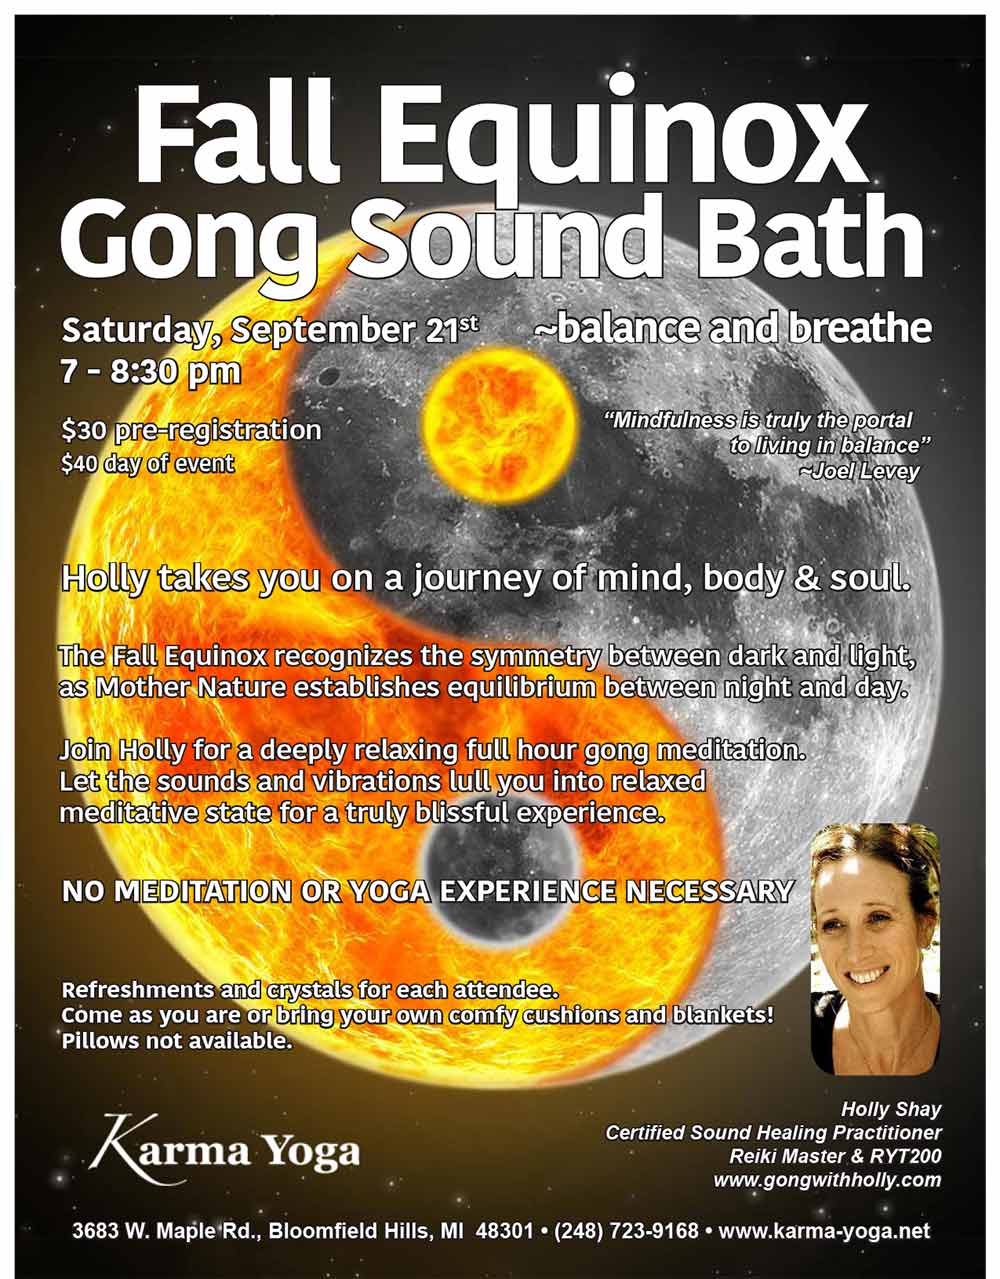 Fall Equinox Gong Sound Bath, Sept 21st, Karma Yoga, Bloomfield Hills Holly Shay Certified Sound Healing Practitioner Reiki Master & RYT200 www.gongwithholly.com